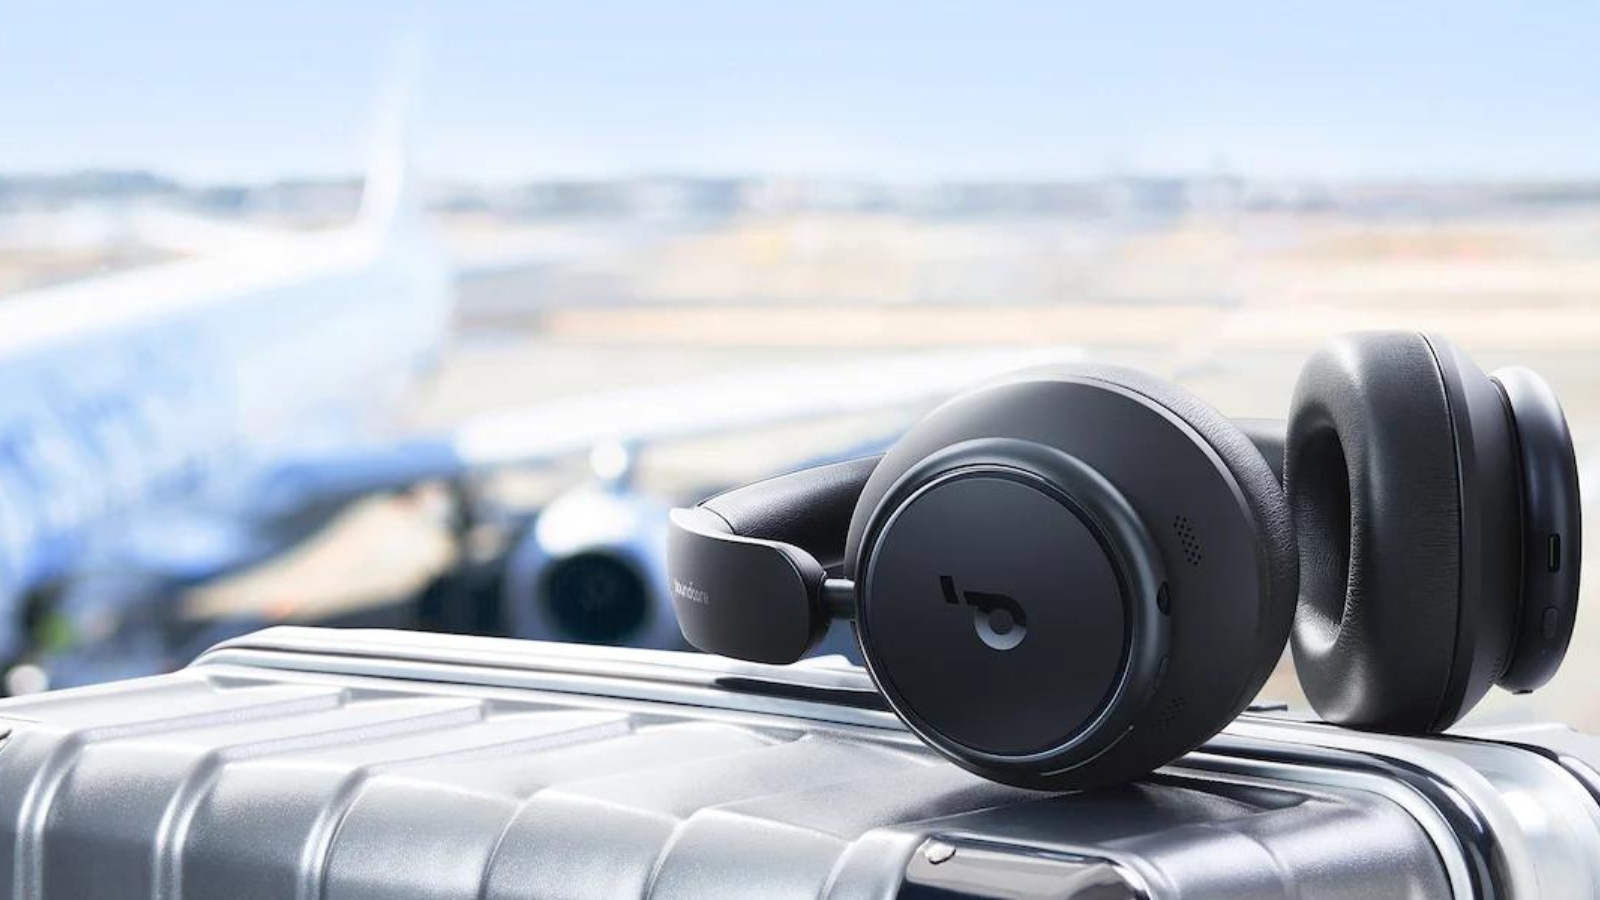 Anker Soundcore Space Q45 headphones on top of suitcase at airport